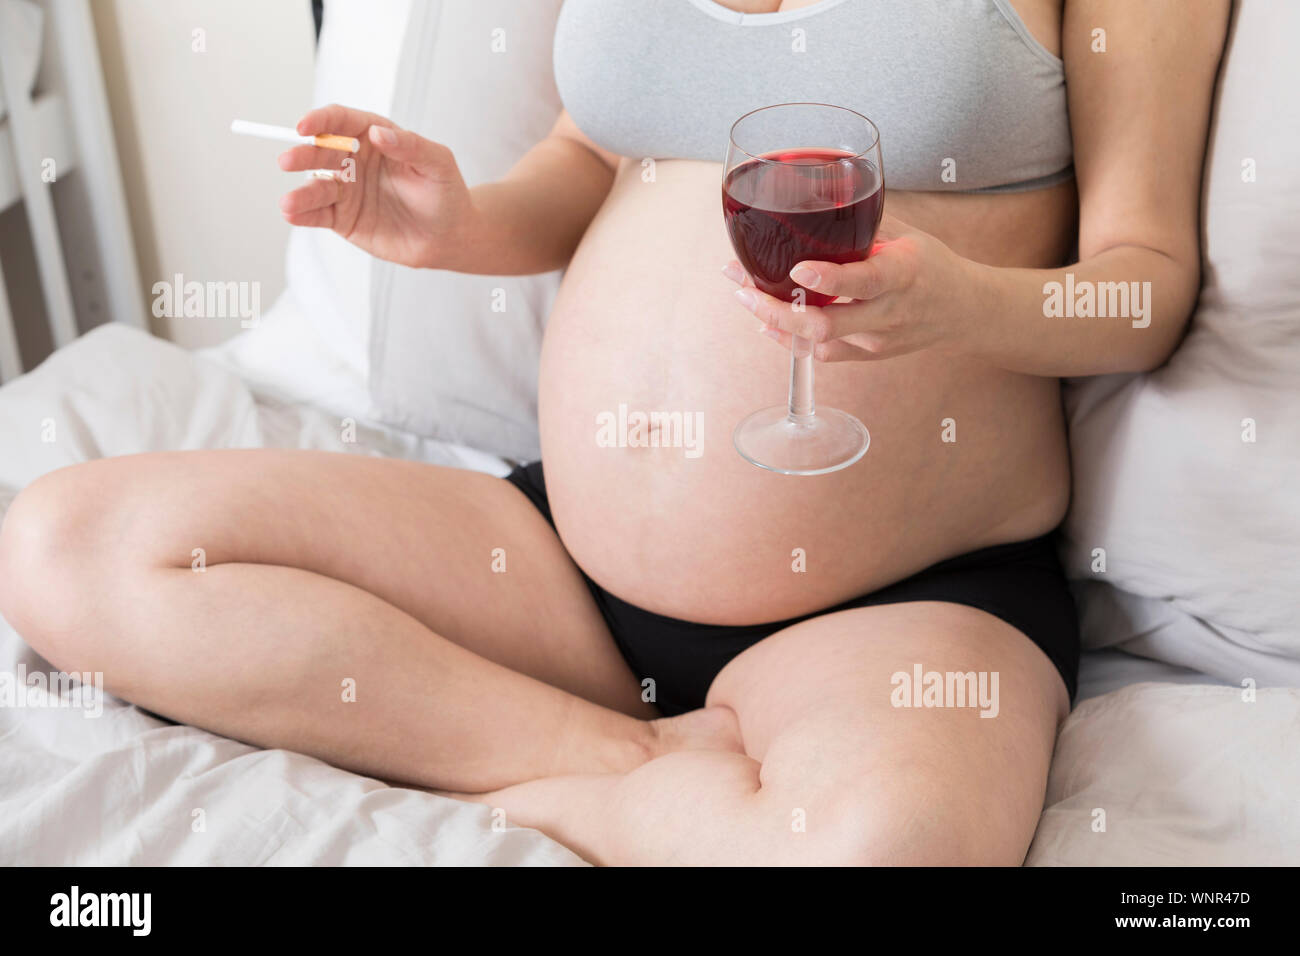 Pregnant woman smoking a cigarette and drinking alcohol, Woman in pregnancy with tobacco and glass of wine Stock Photo